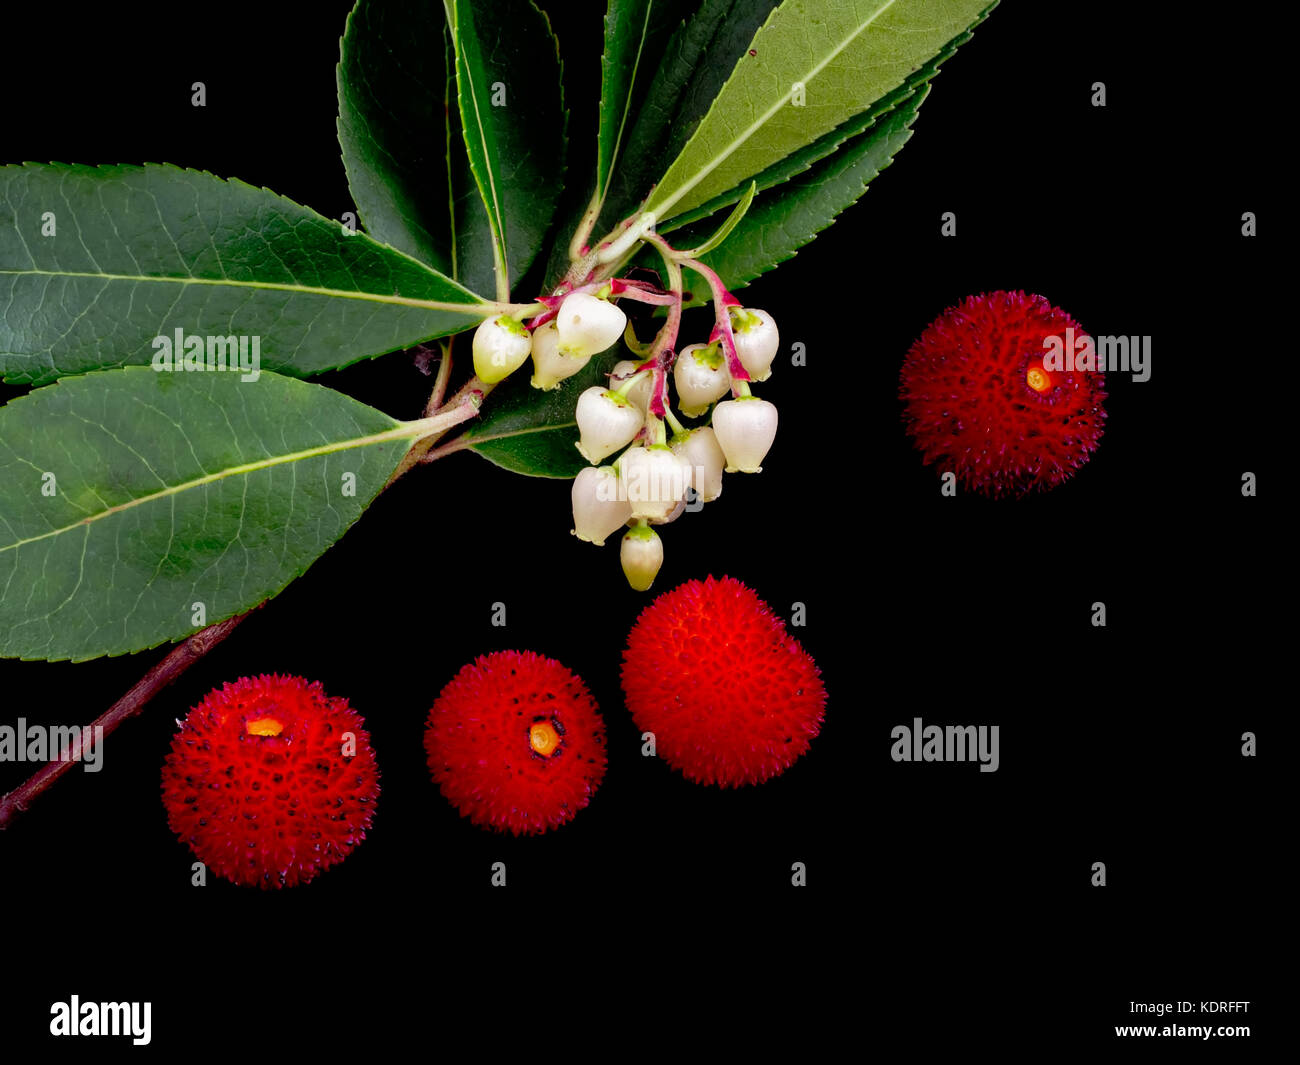 Wild Arbutus unedo, Strawberry Tree. Flowers and fruit appear at the same time.. Stock Photo